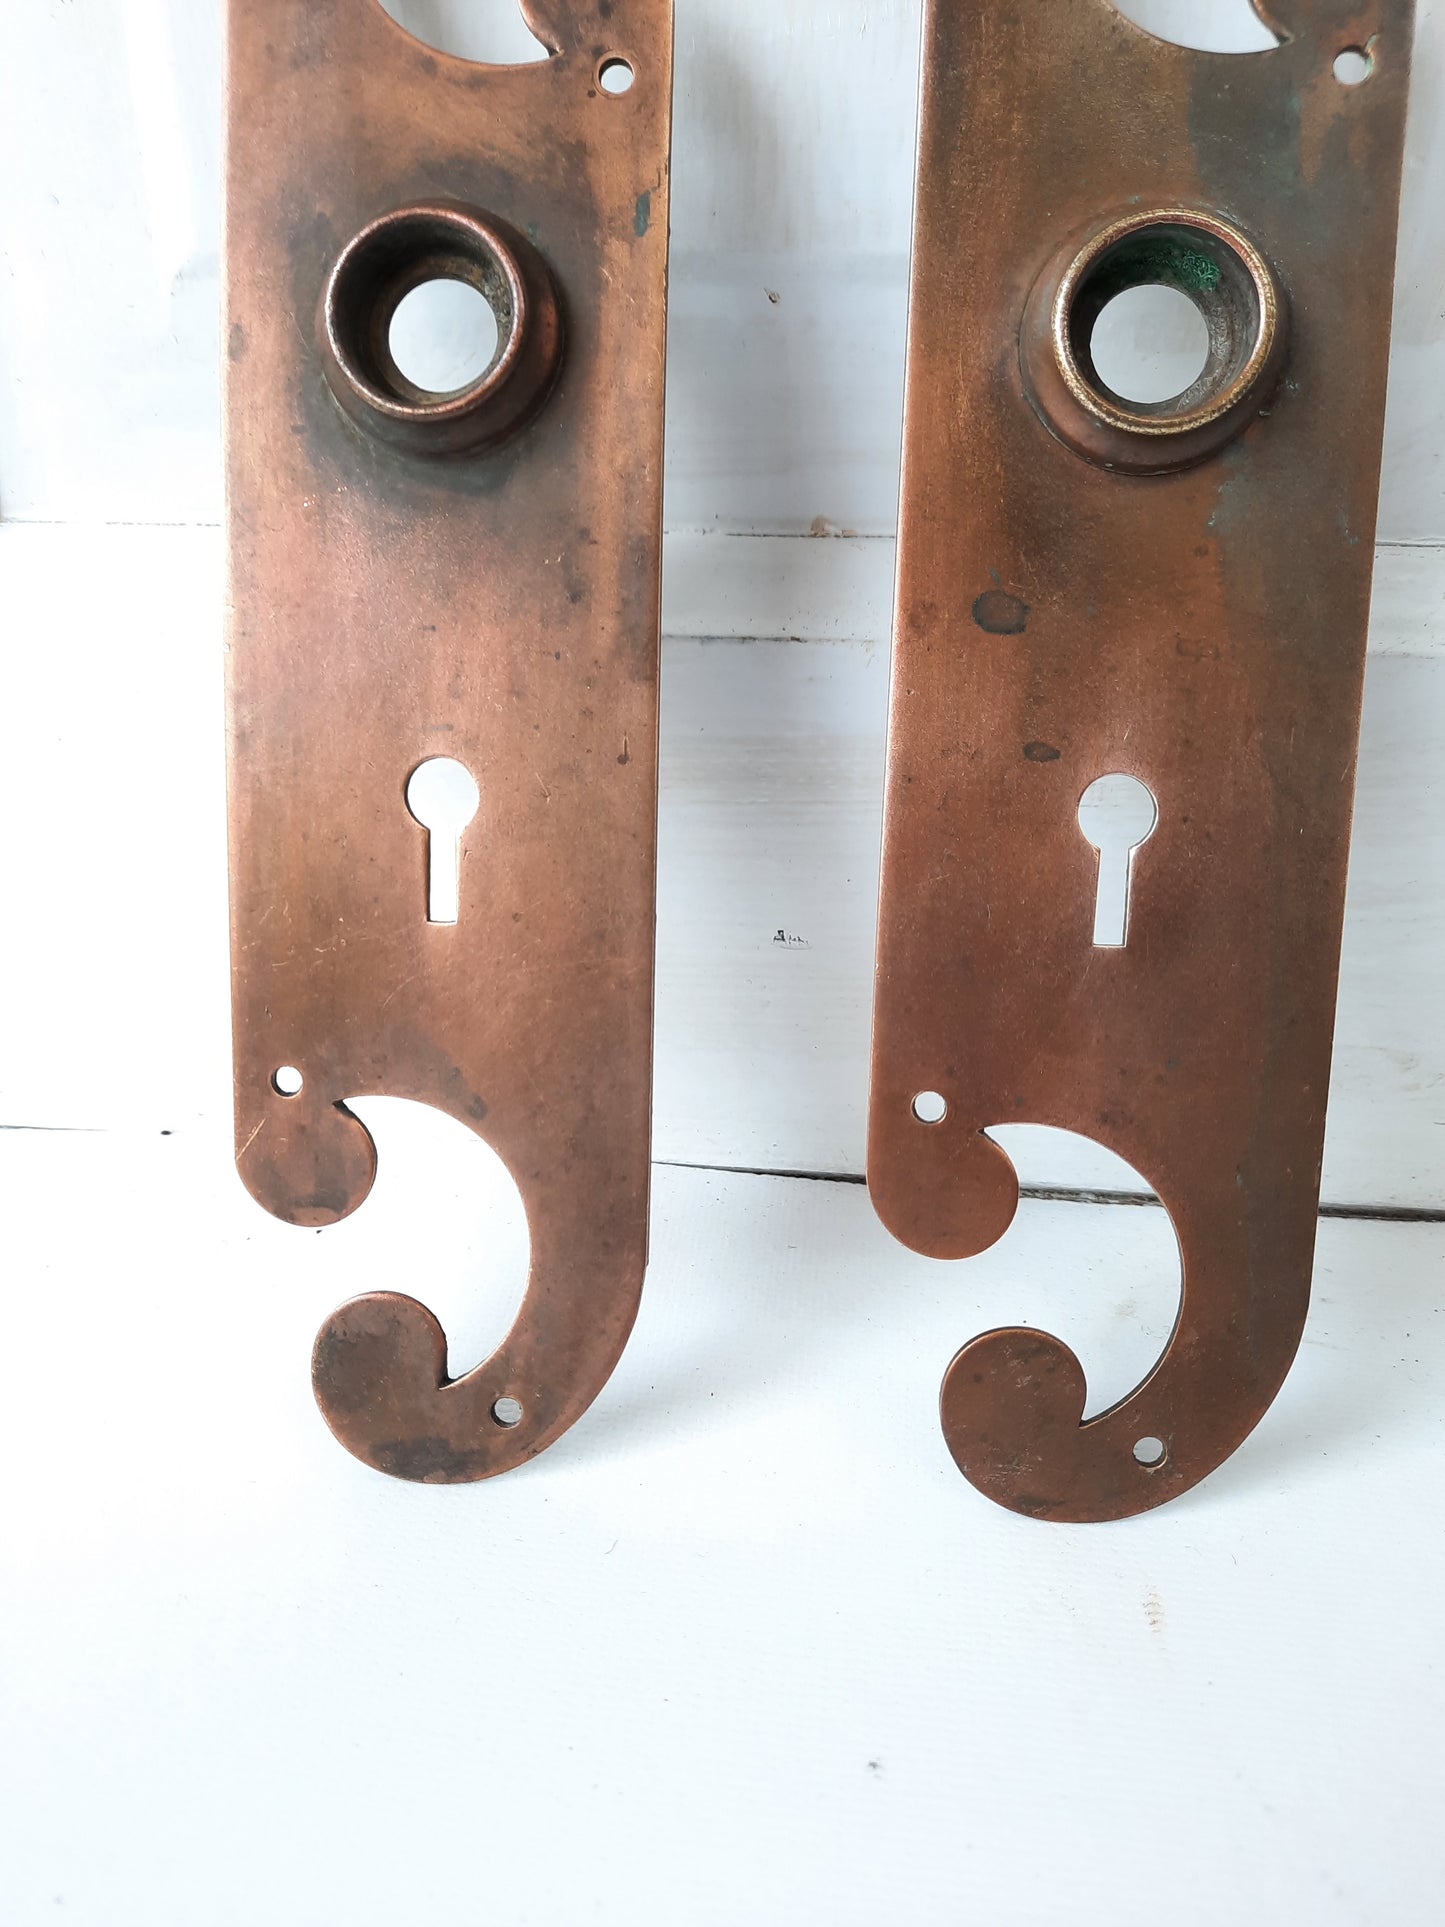 Pair of Bronze Spiral Cut-out Antique Push Plate, Antique Bronze Swinging Door Plate, Doorknob Escutcheons 013104